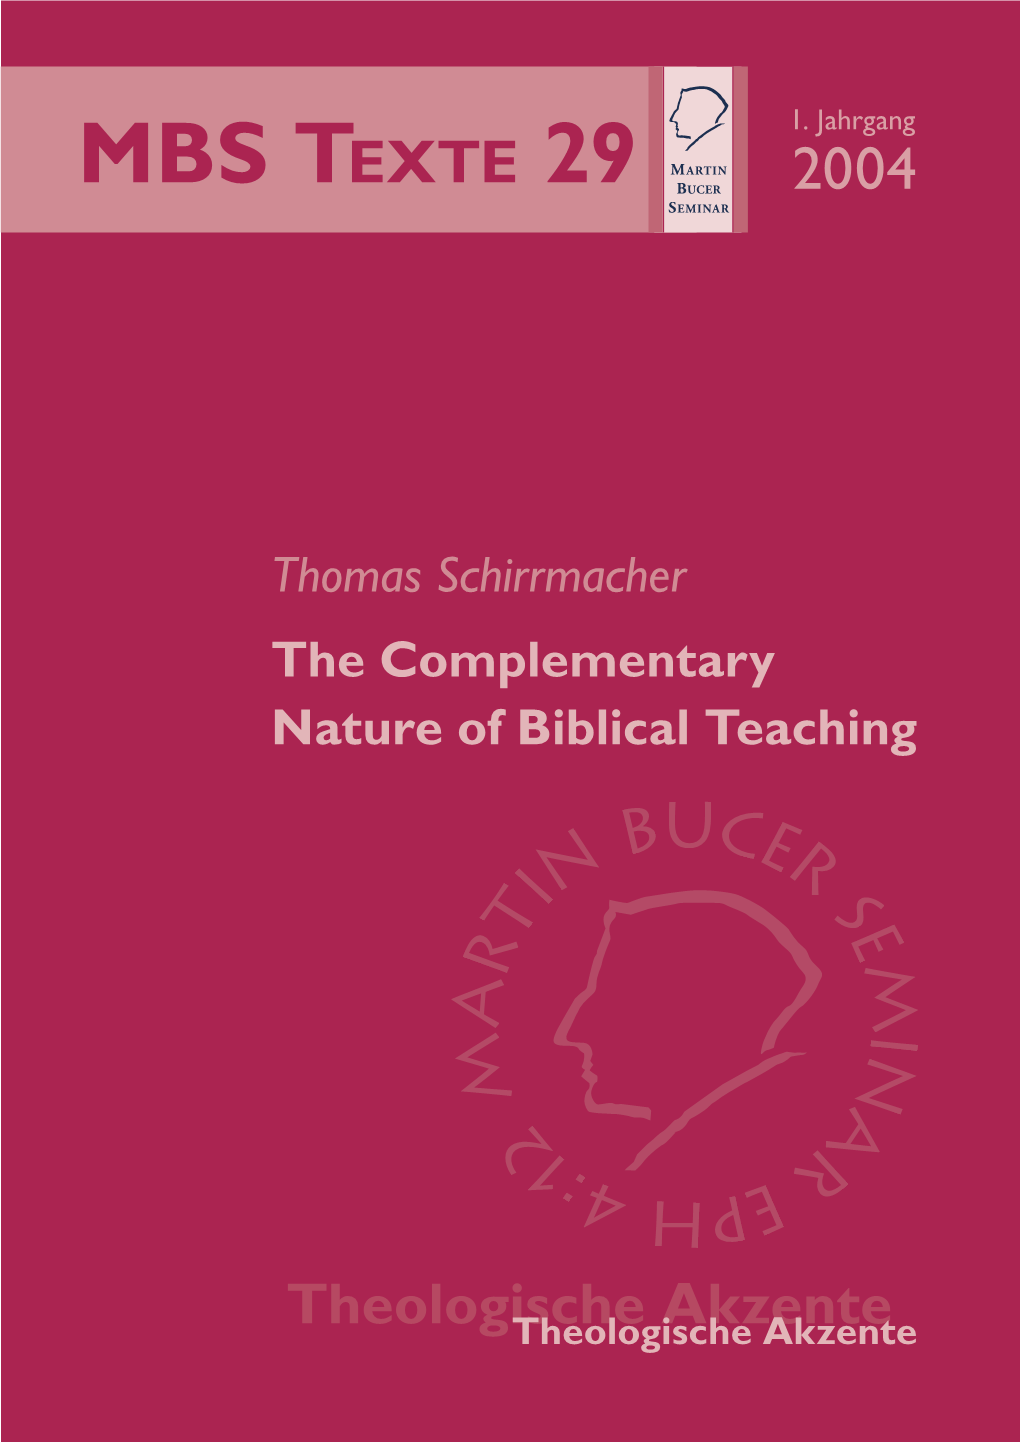 The Complementary Nature of Biblical Teaching